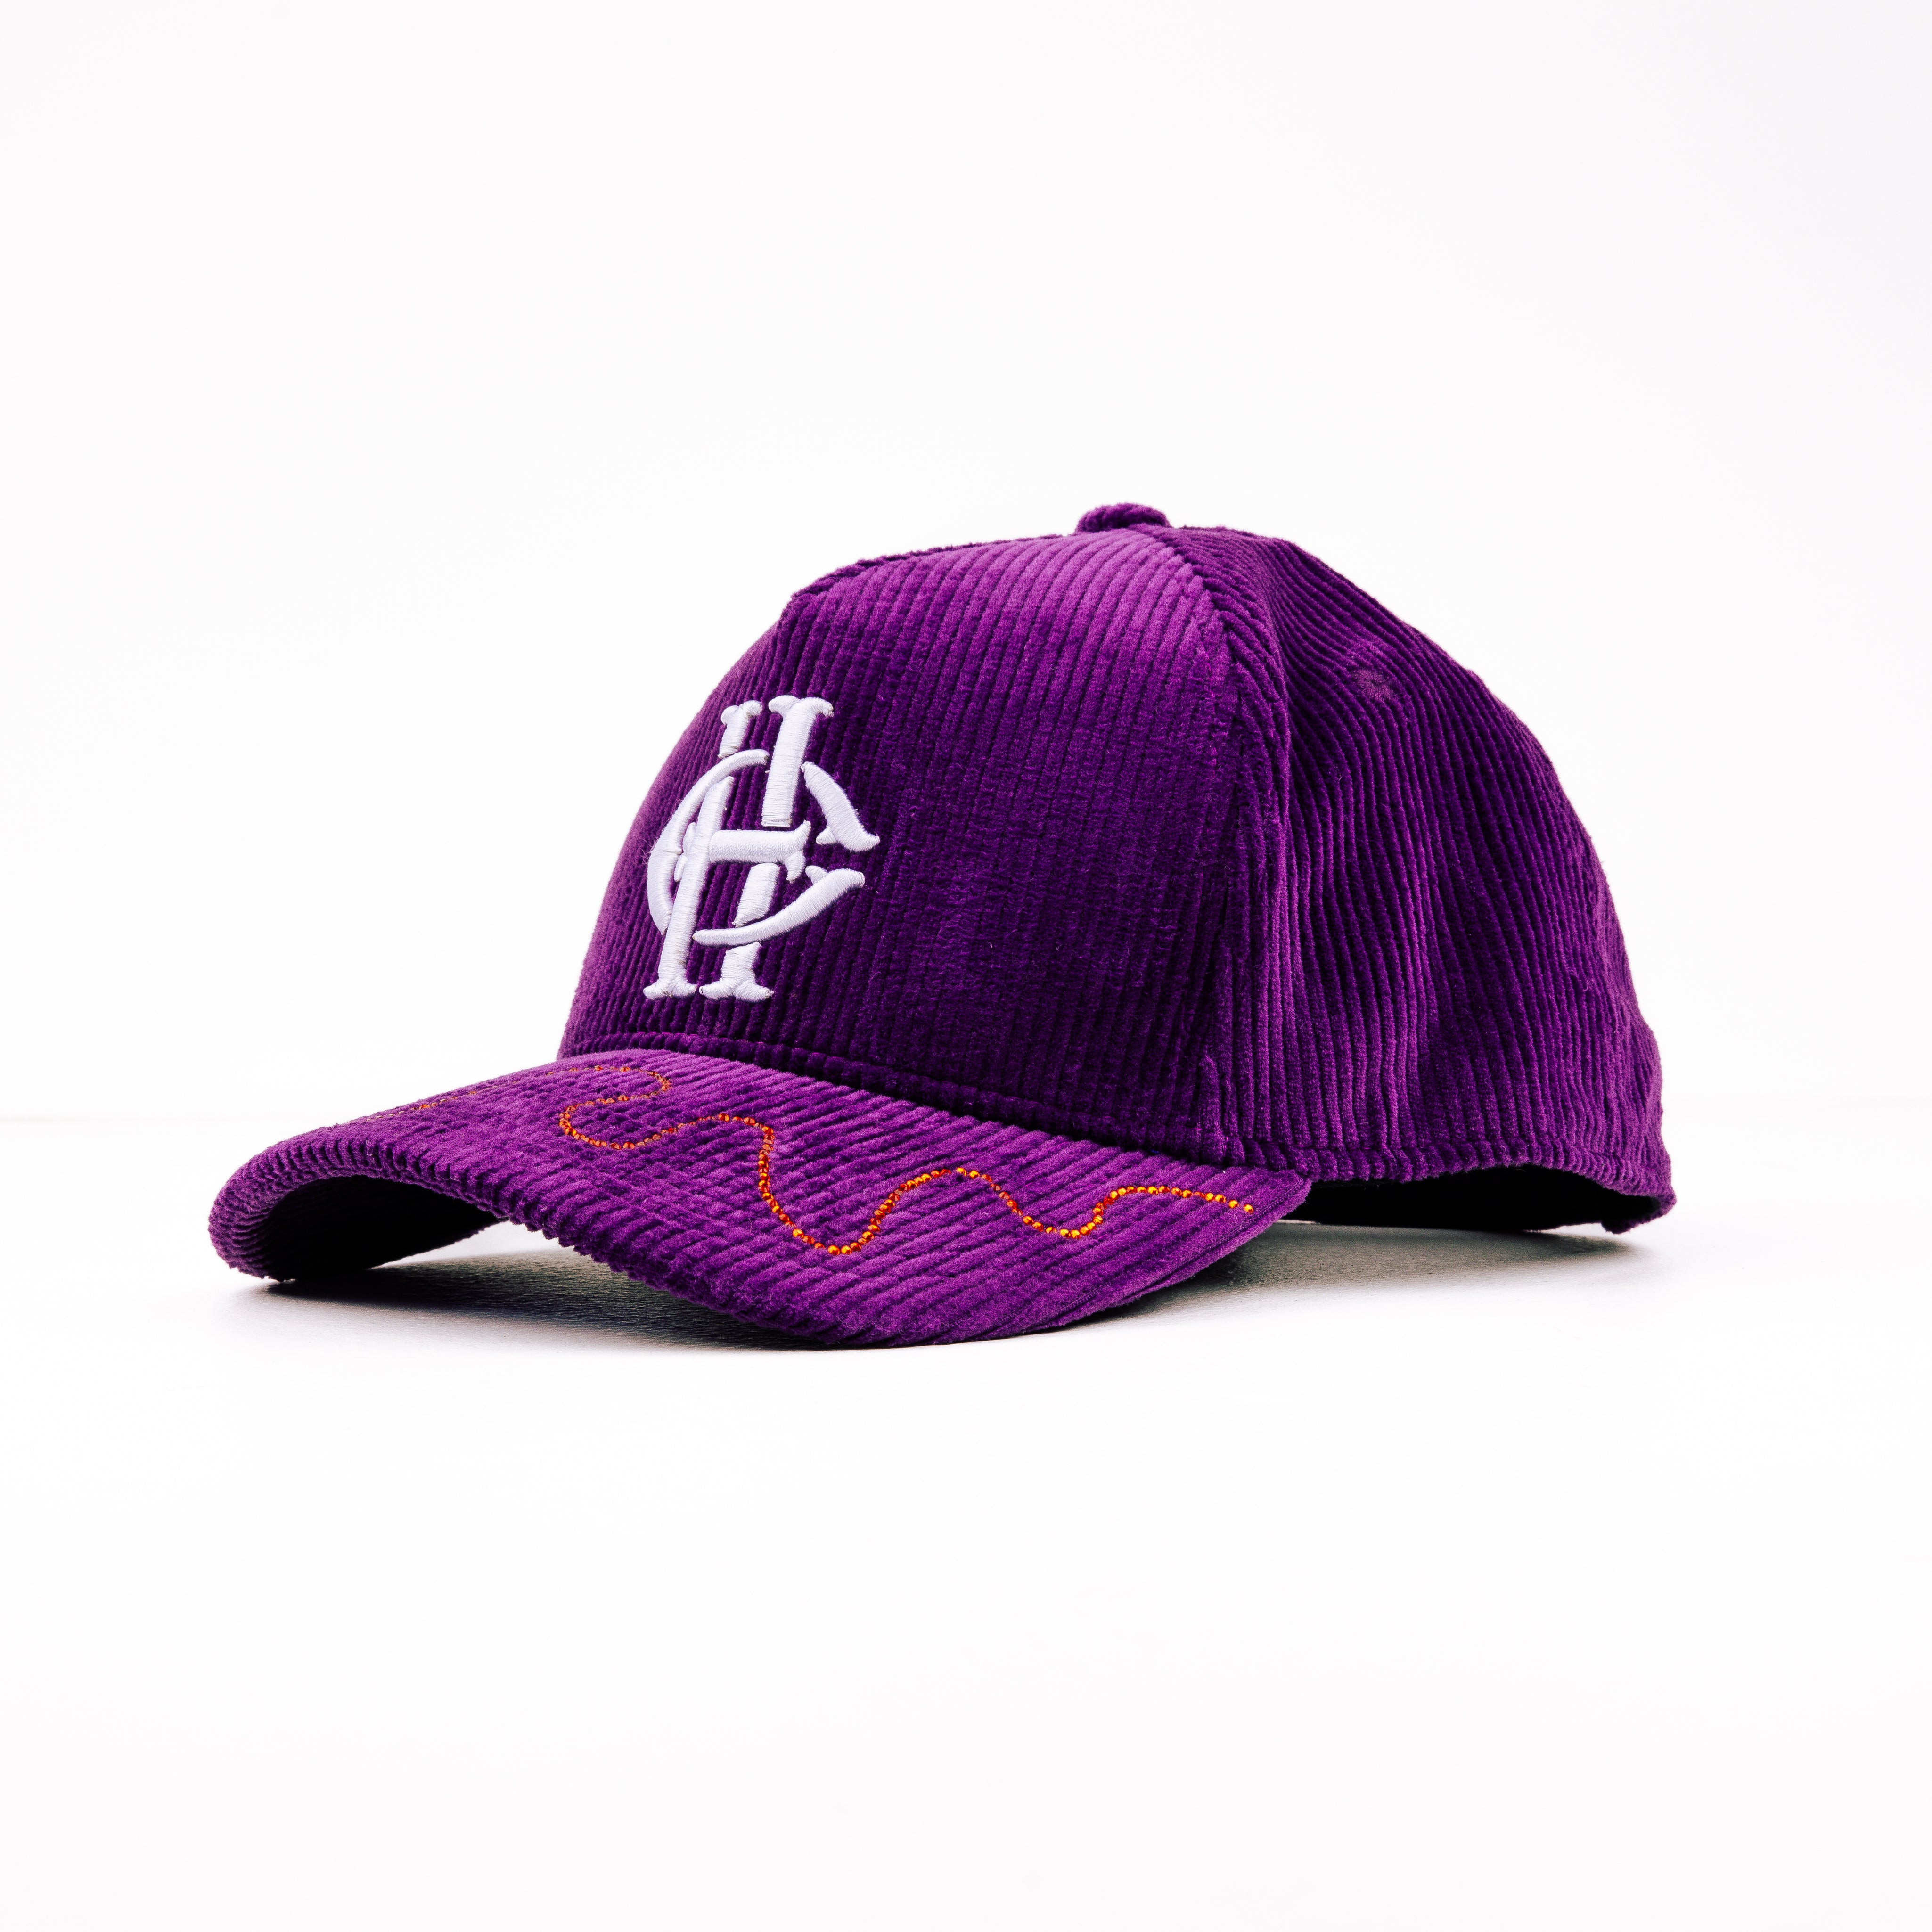 Common Hype “Crystal’d” Corduroy Hat (1 of 1) - H8